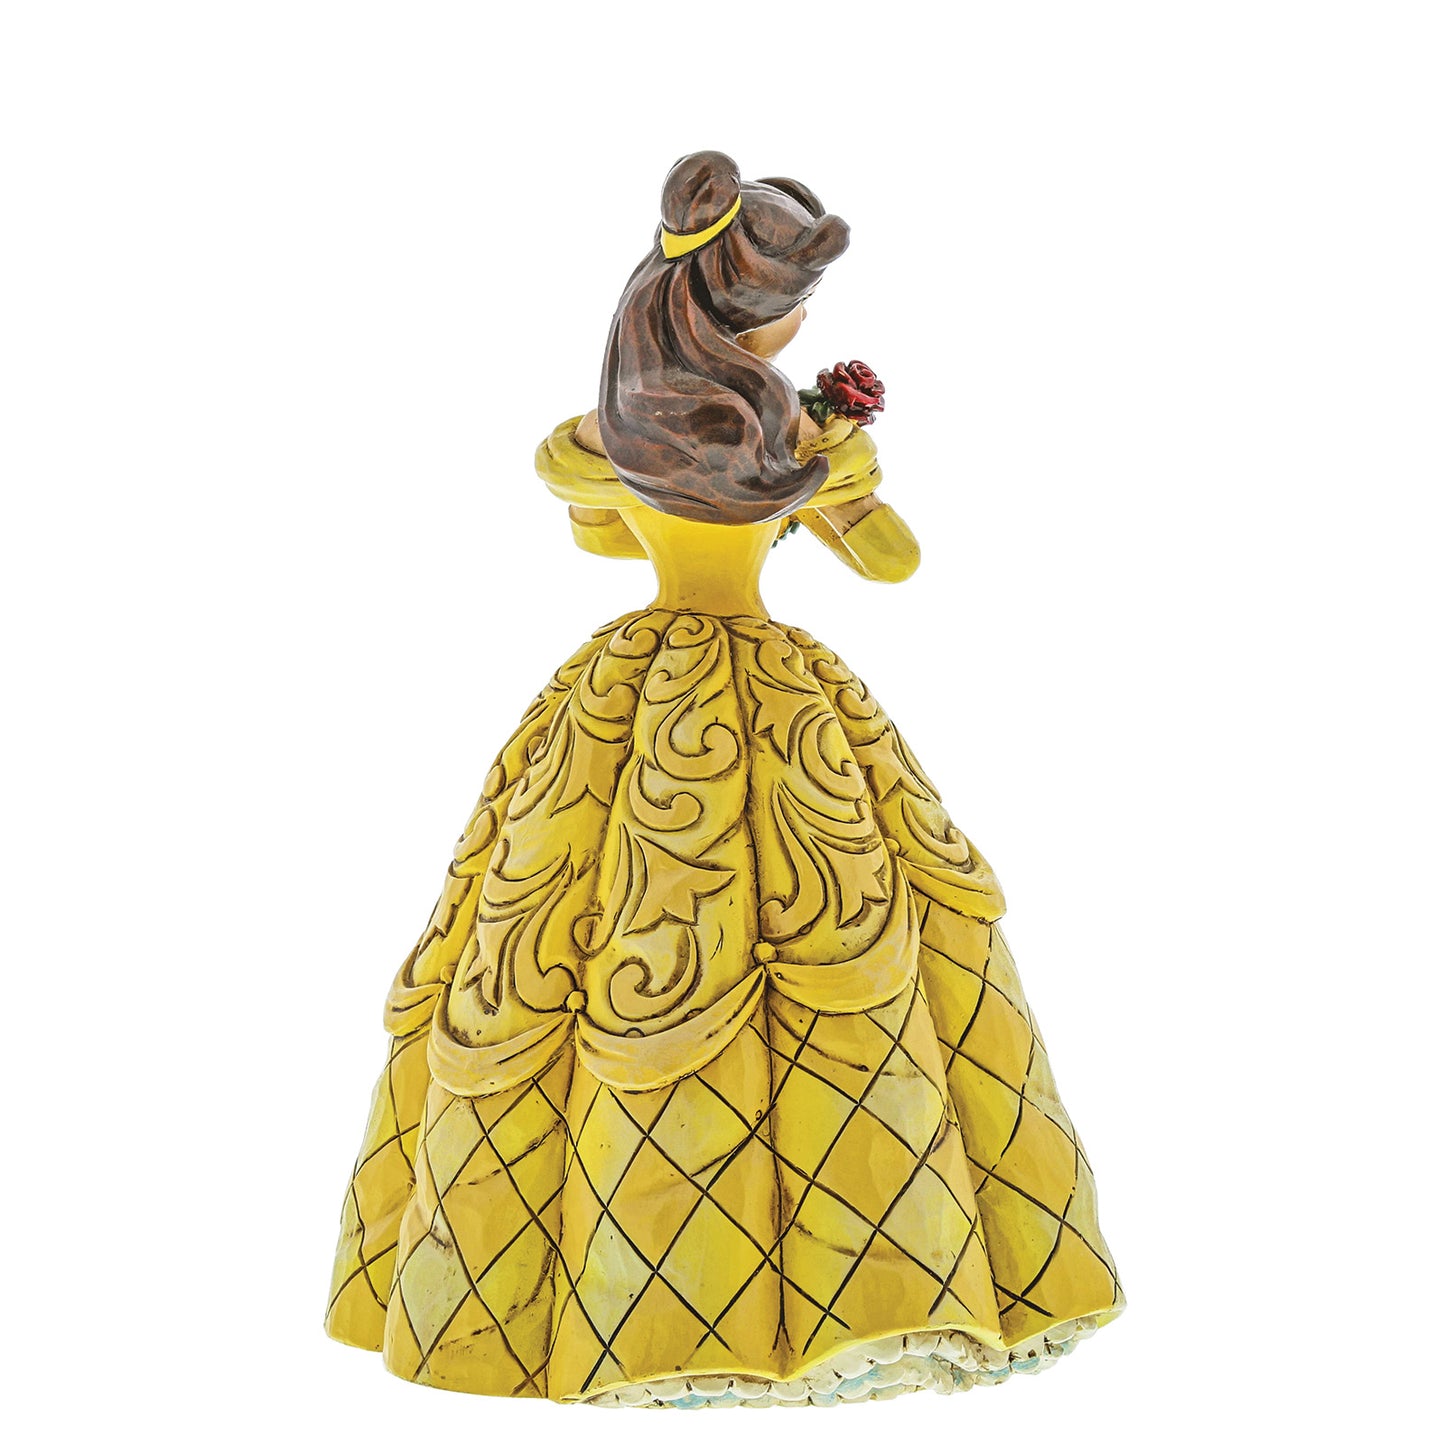 Disney Traditions Enchanted Belle Figurine